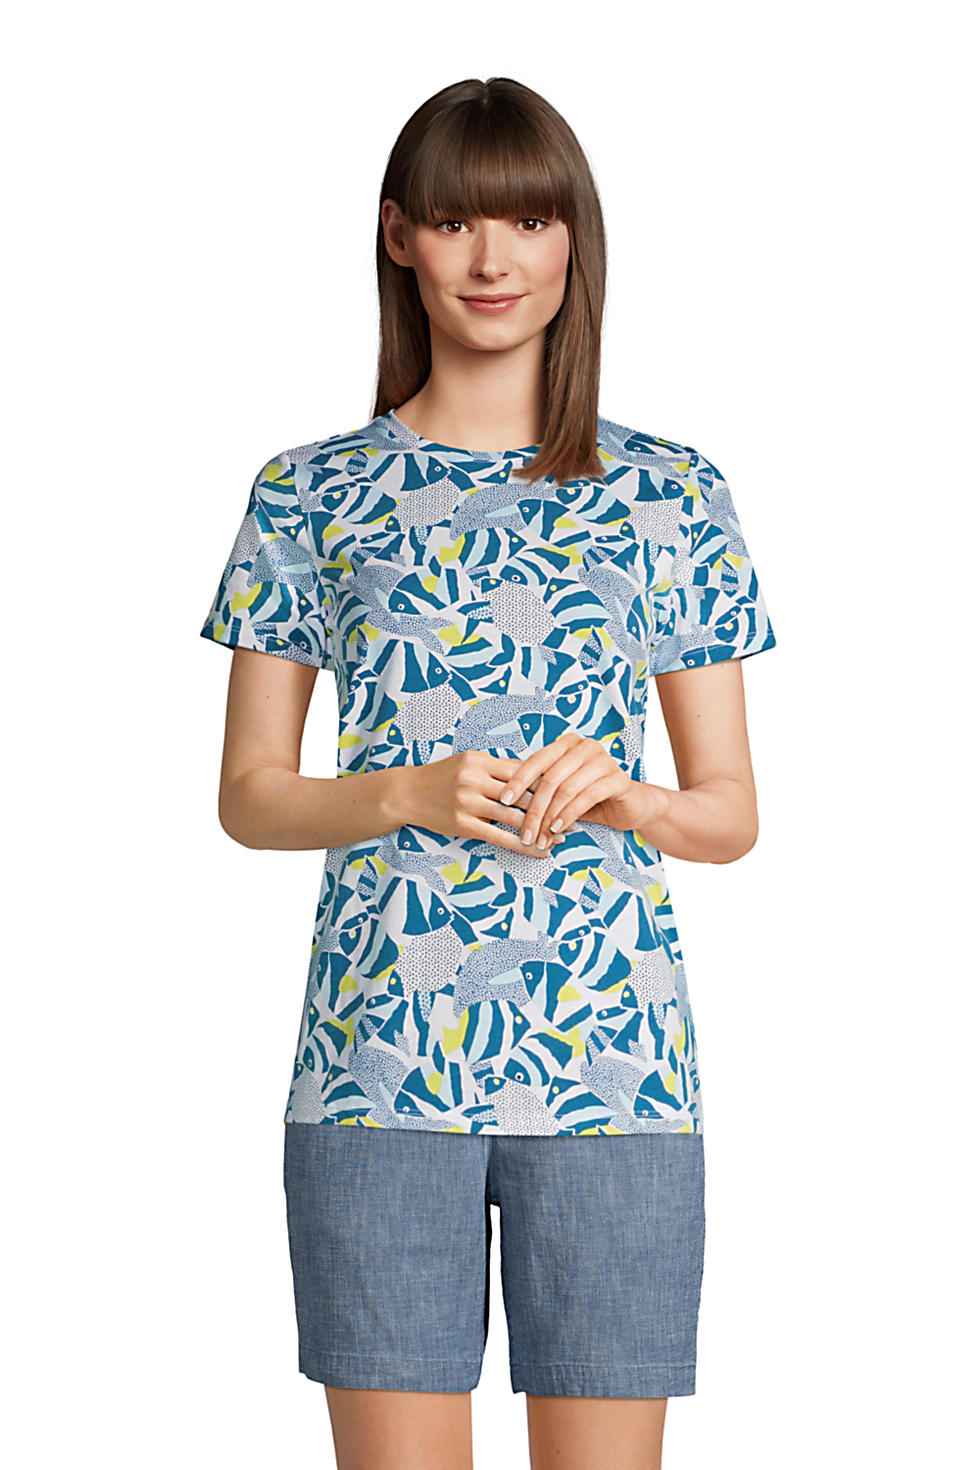 Lands End Women's Relaxed Supima Cotton Short Sleeve Crewneck T-Shirt (Baltic Teal Angel Fish)